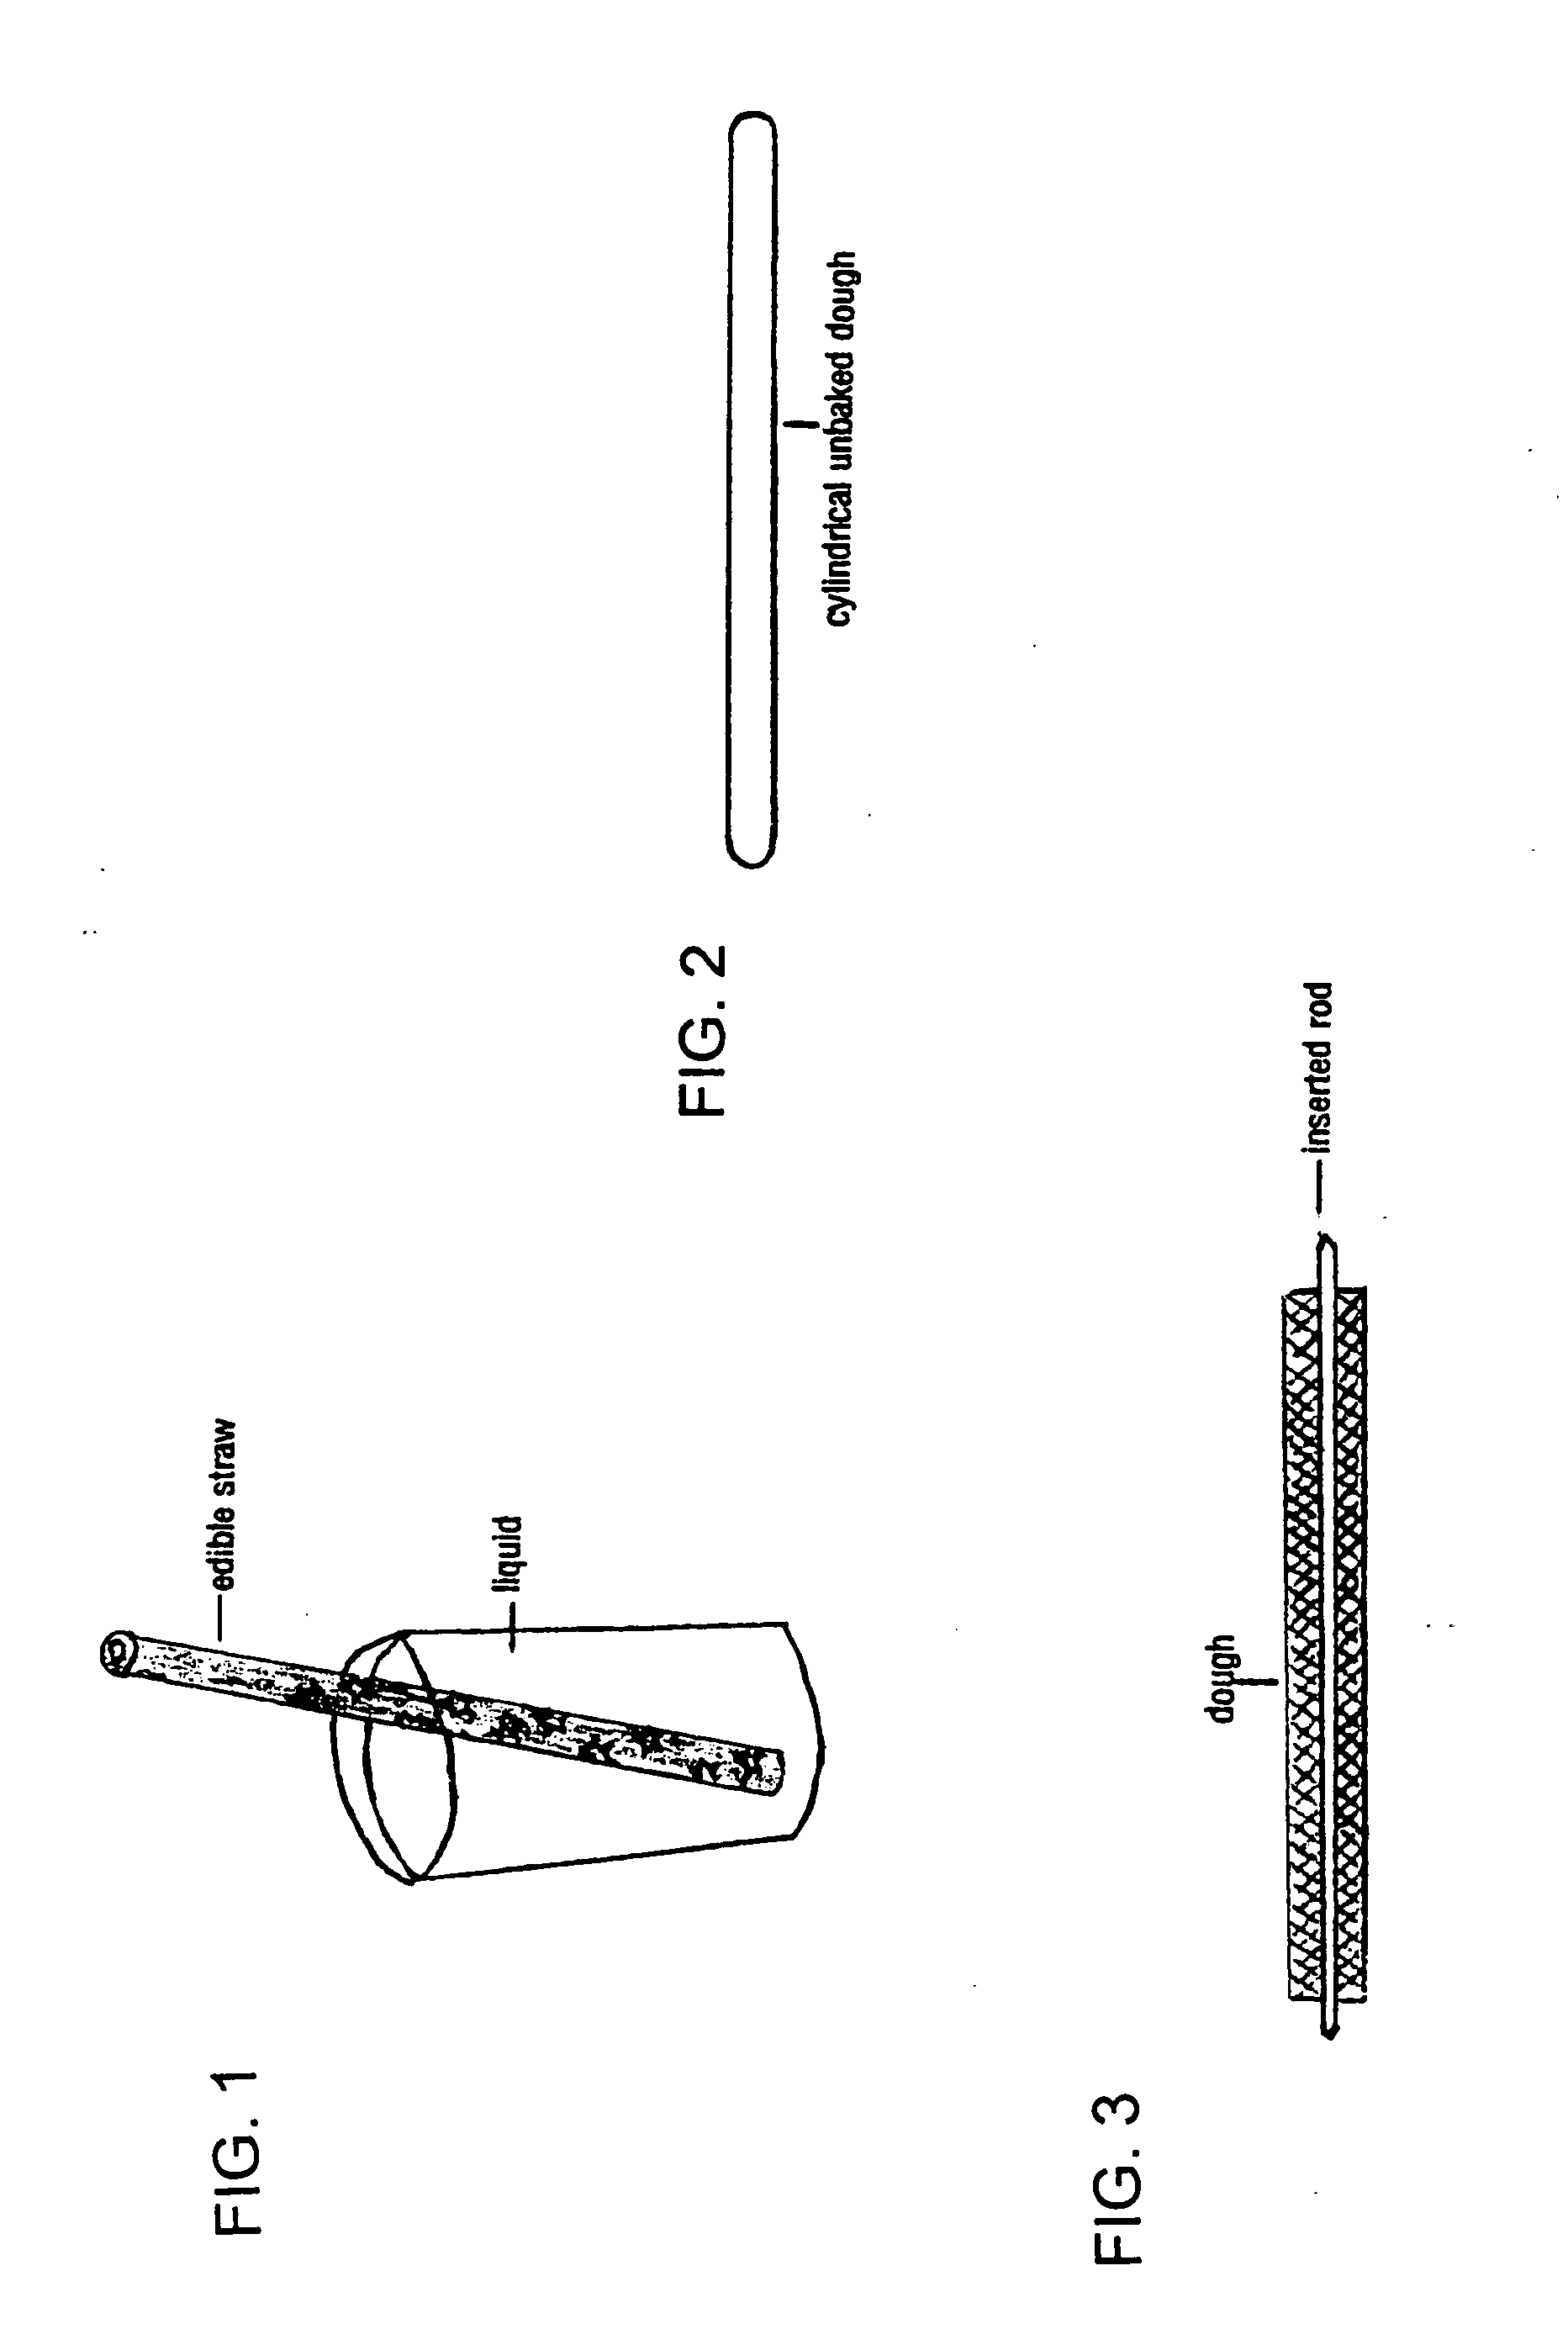 Edible straw and method for making the straw